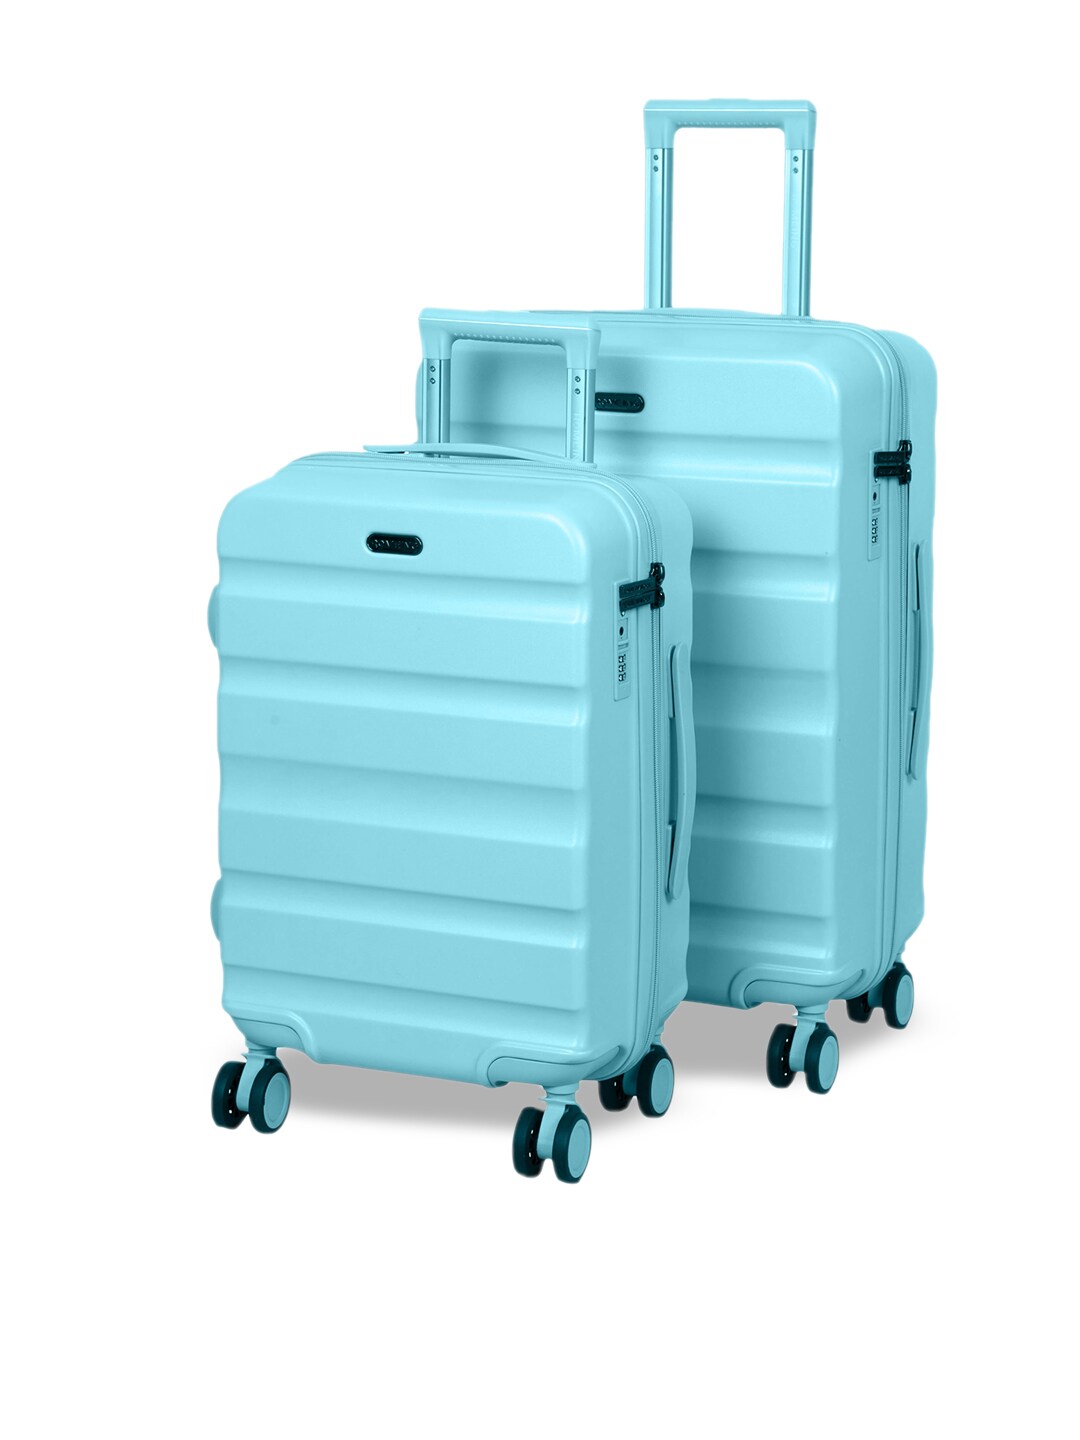 ROMEING Venice Sky Blue Set of 2 Polycarbonate Trolley Suitcase Price in India